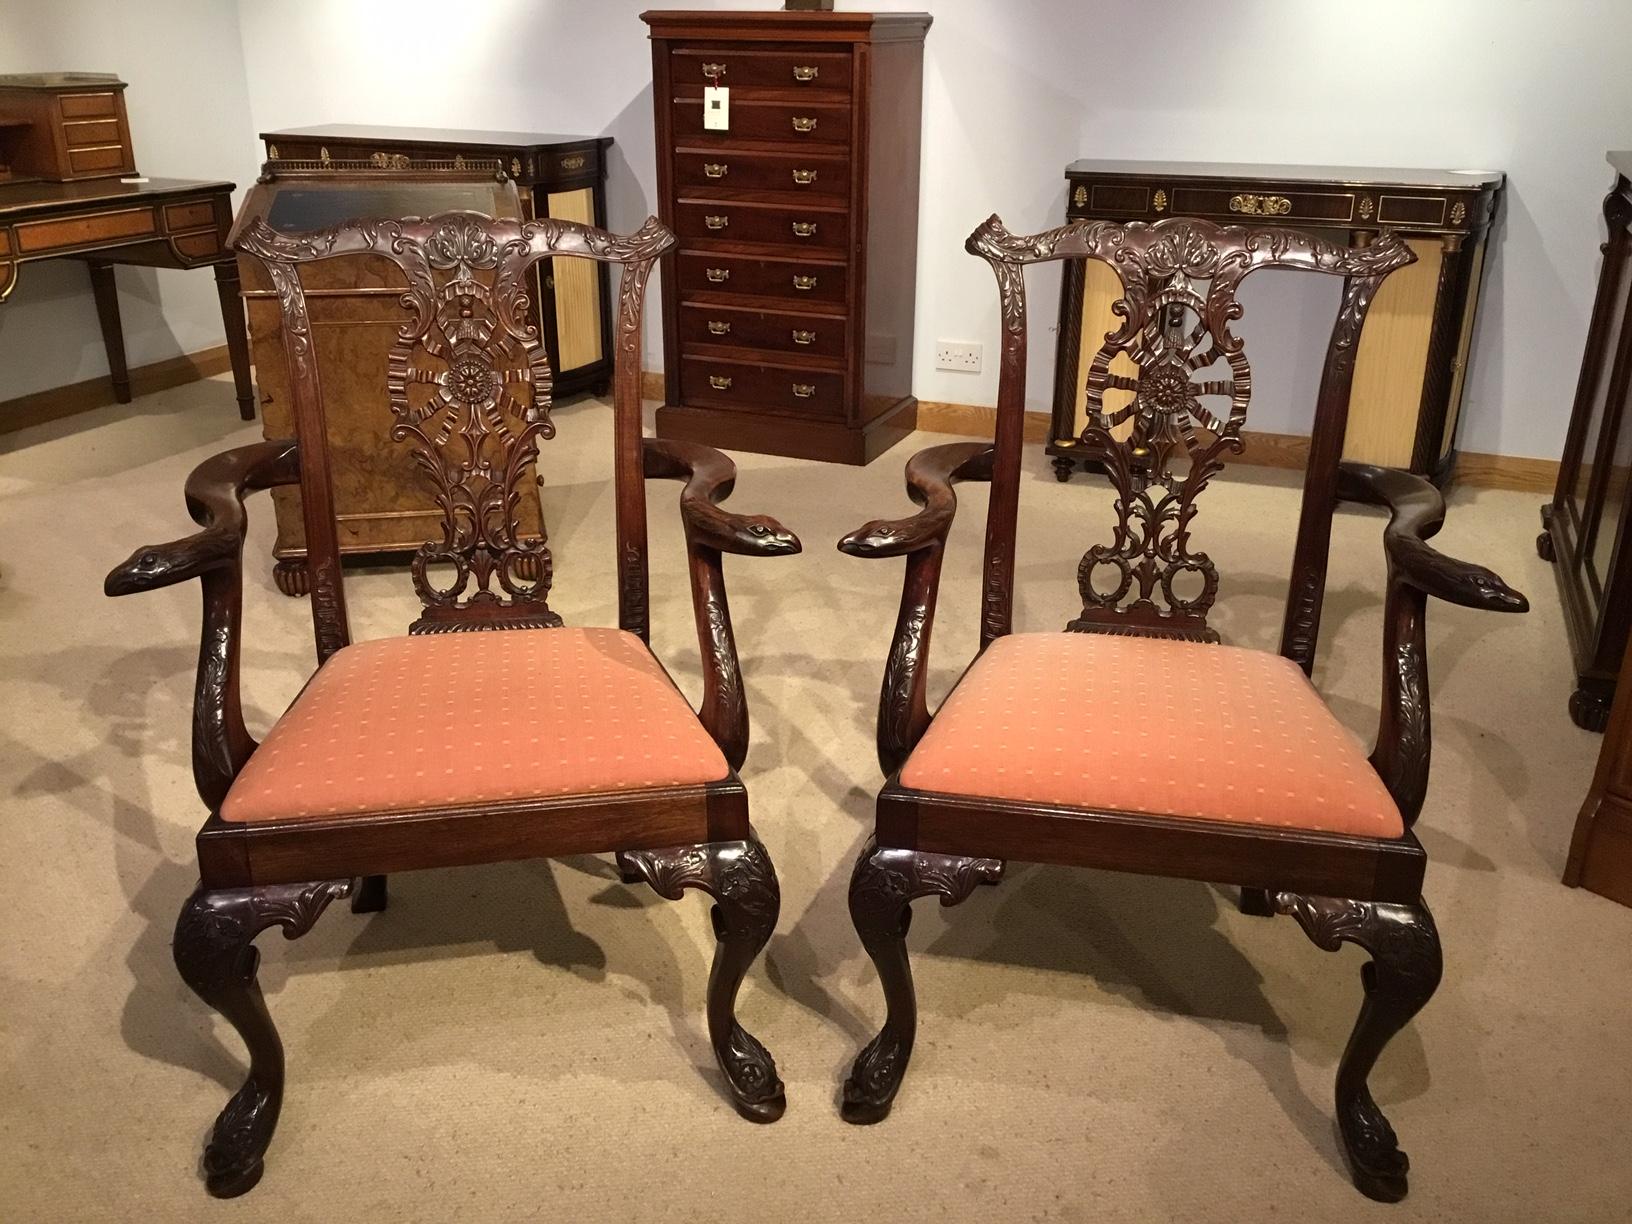 Set of 8 English Chippendale Revival Mahogany Chairs In Excellent Condition For Sale In Darwen, GB